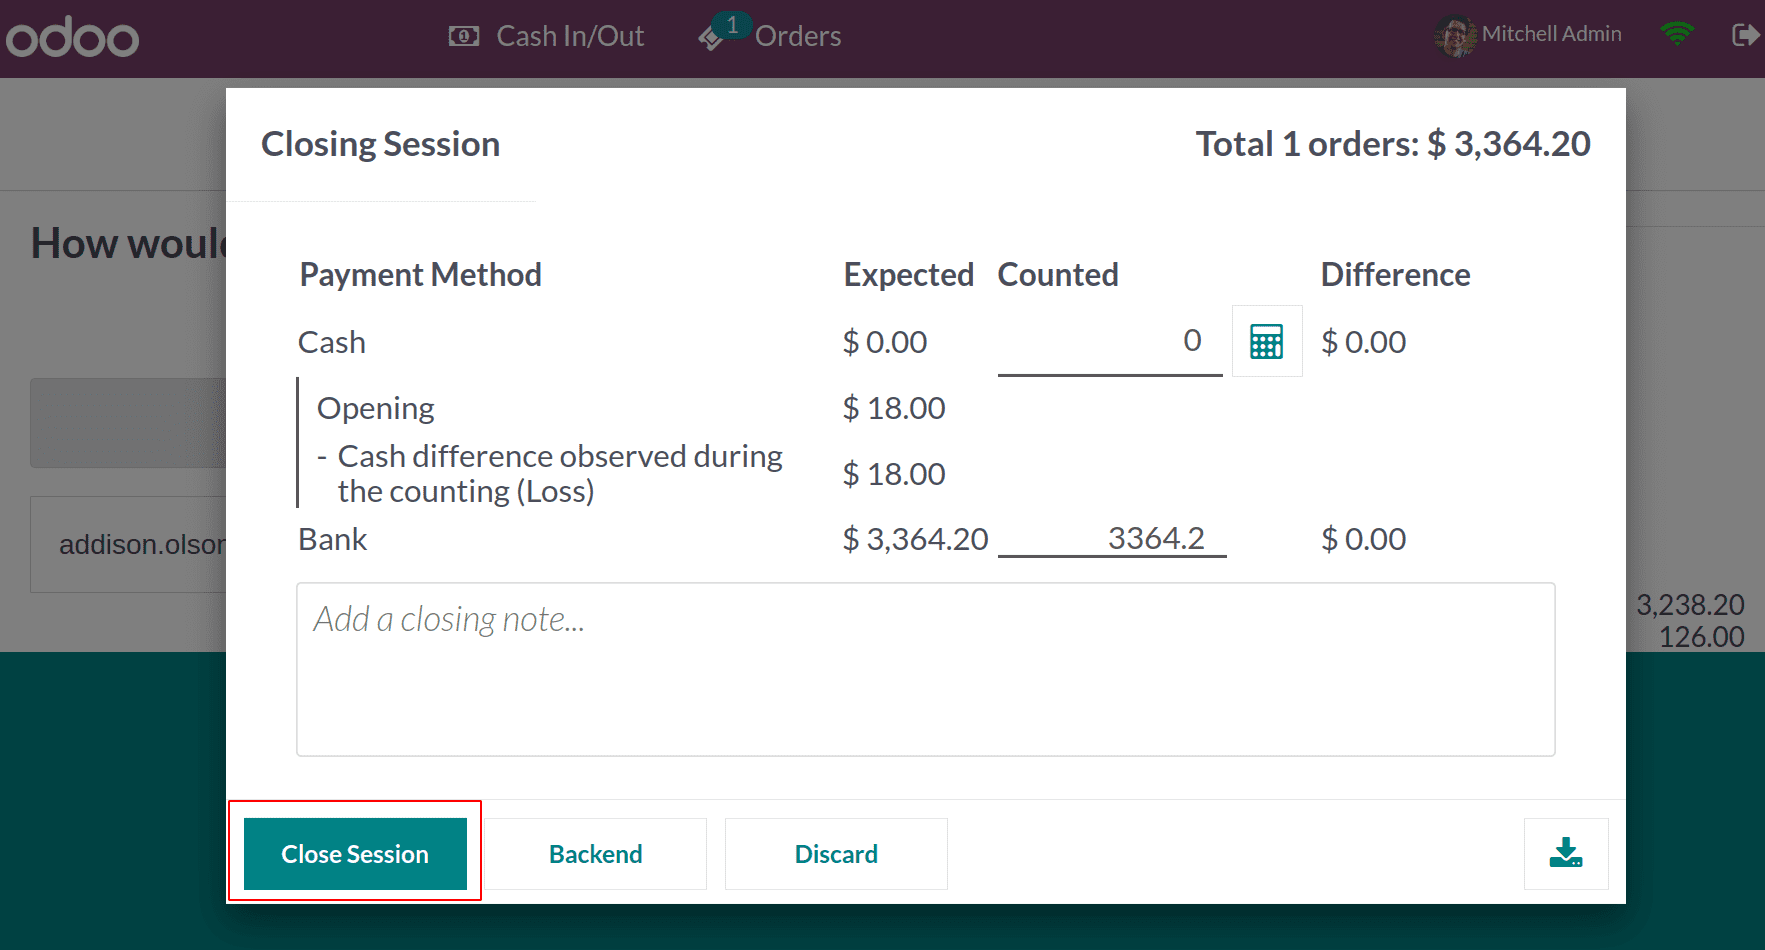 How to Ship Later in Odoo 16 POS-cybrosys